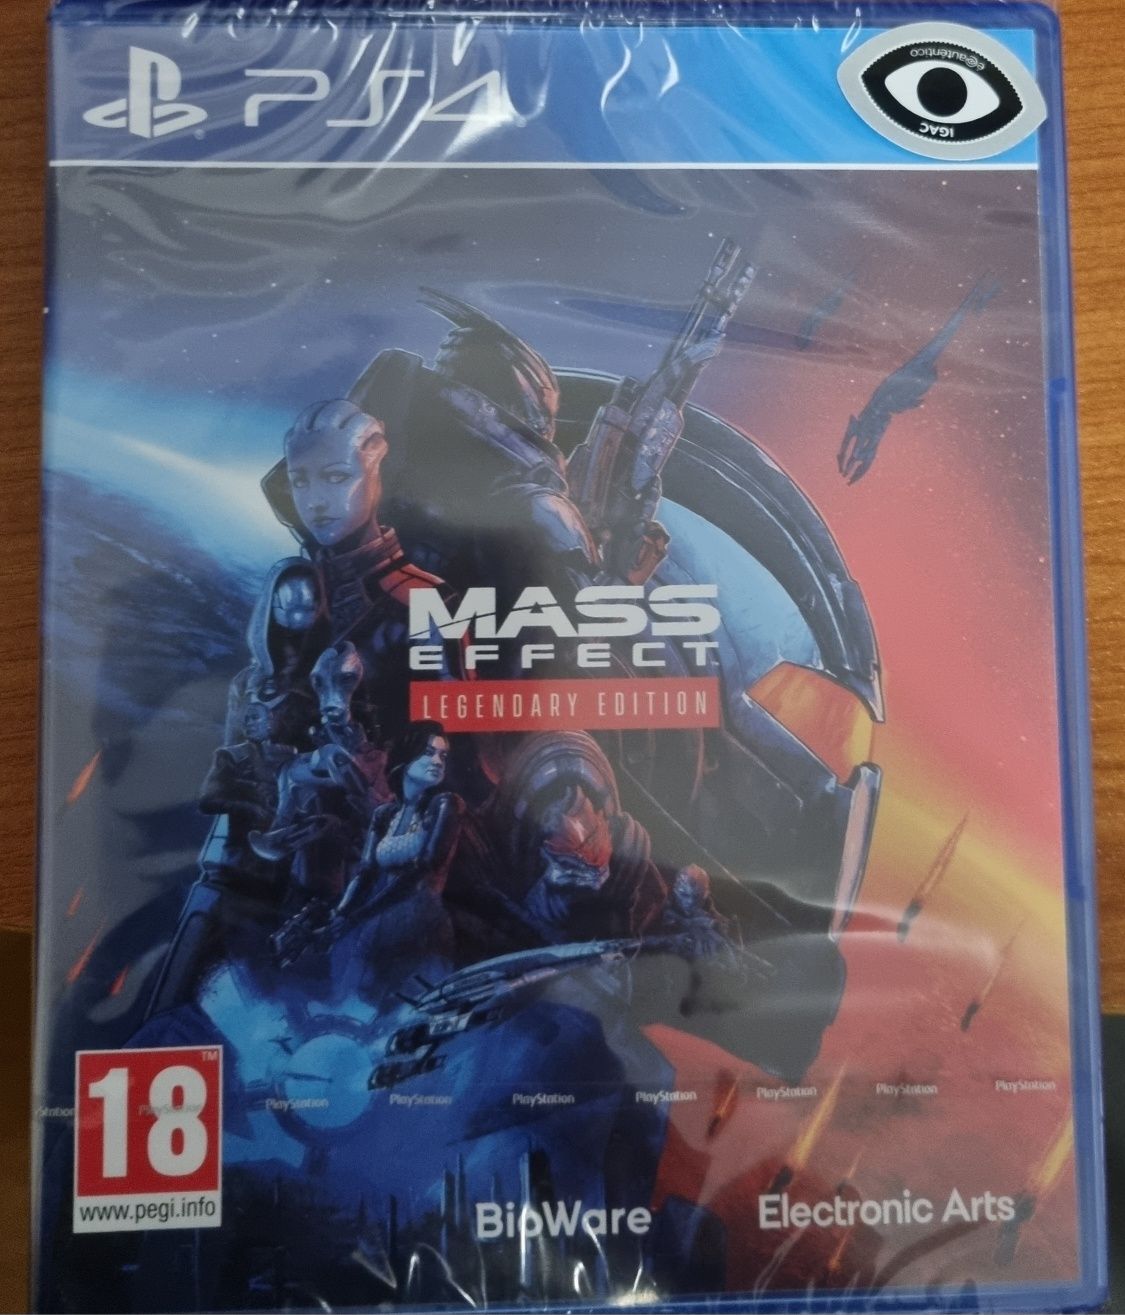 Ps4 Mass Effect edition trilogy 1 2 3 jogo ps5 ps 4 5 remastered